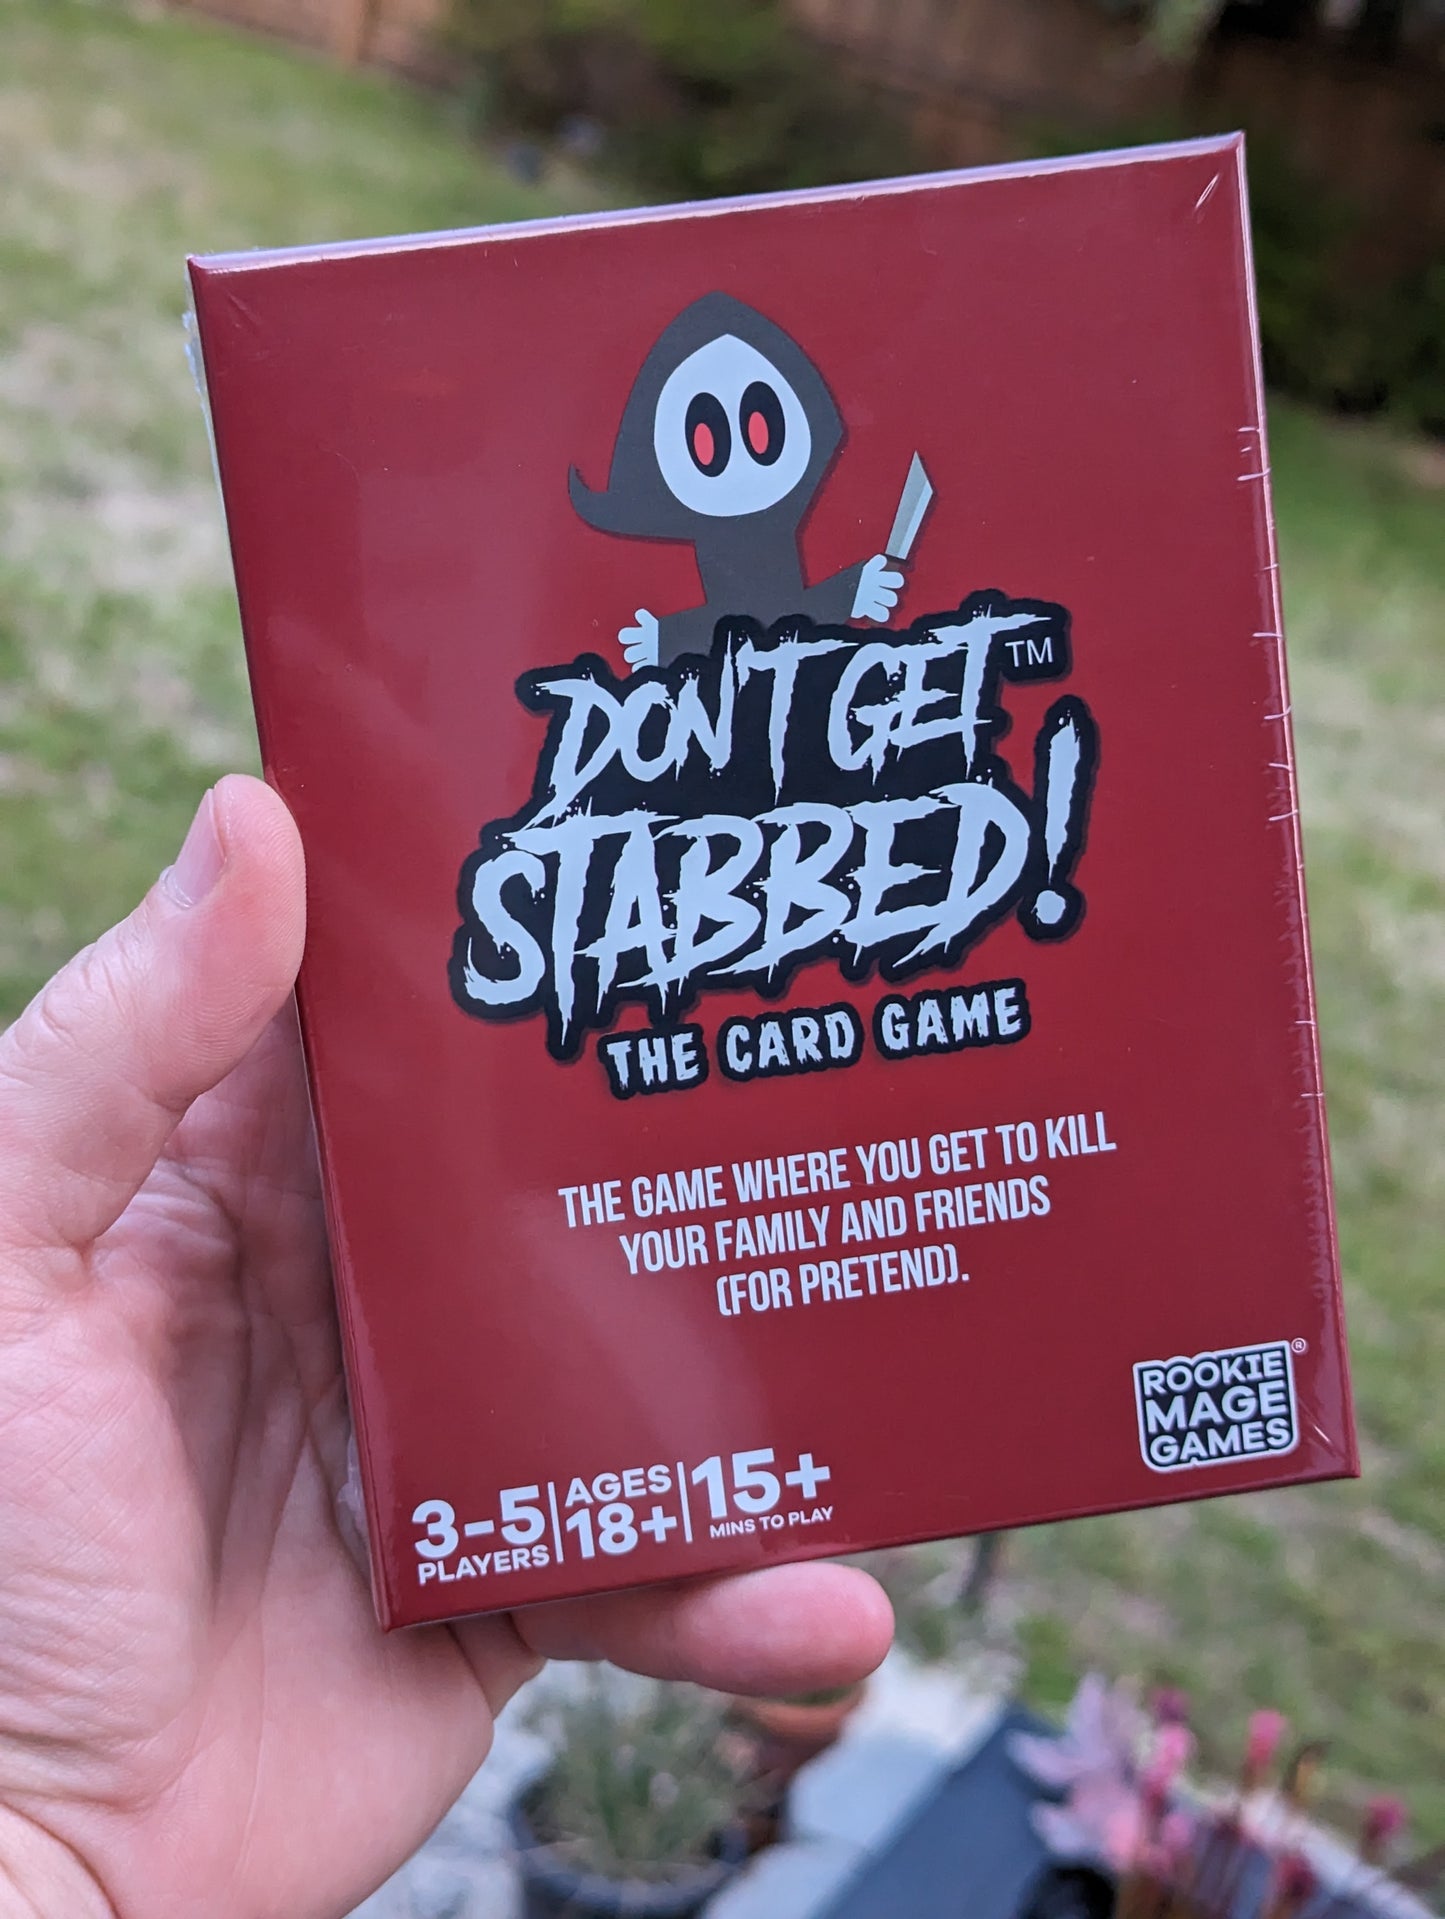 Don't Get Stabbed! The card game